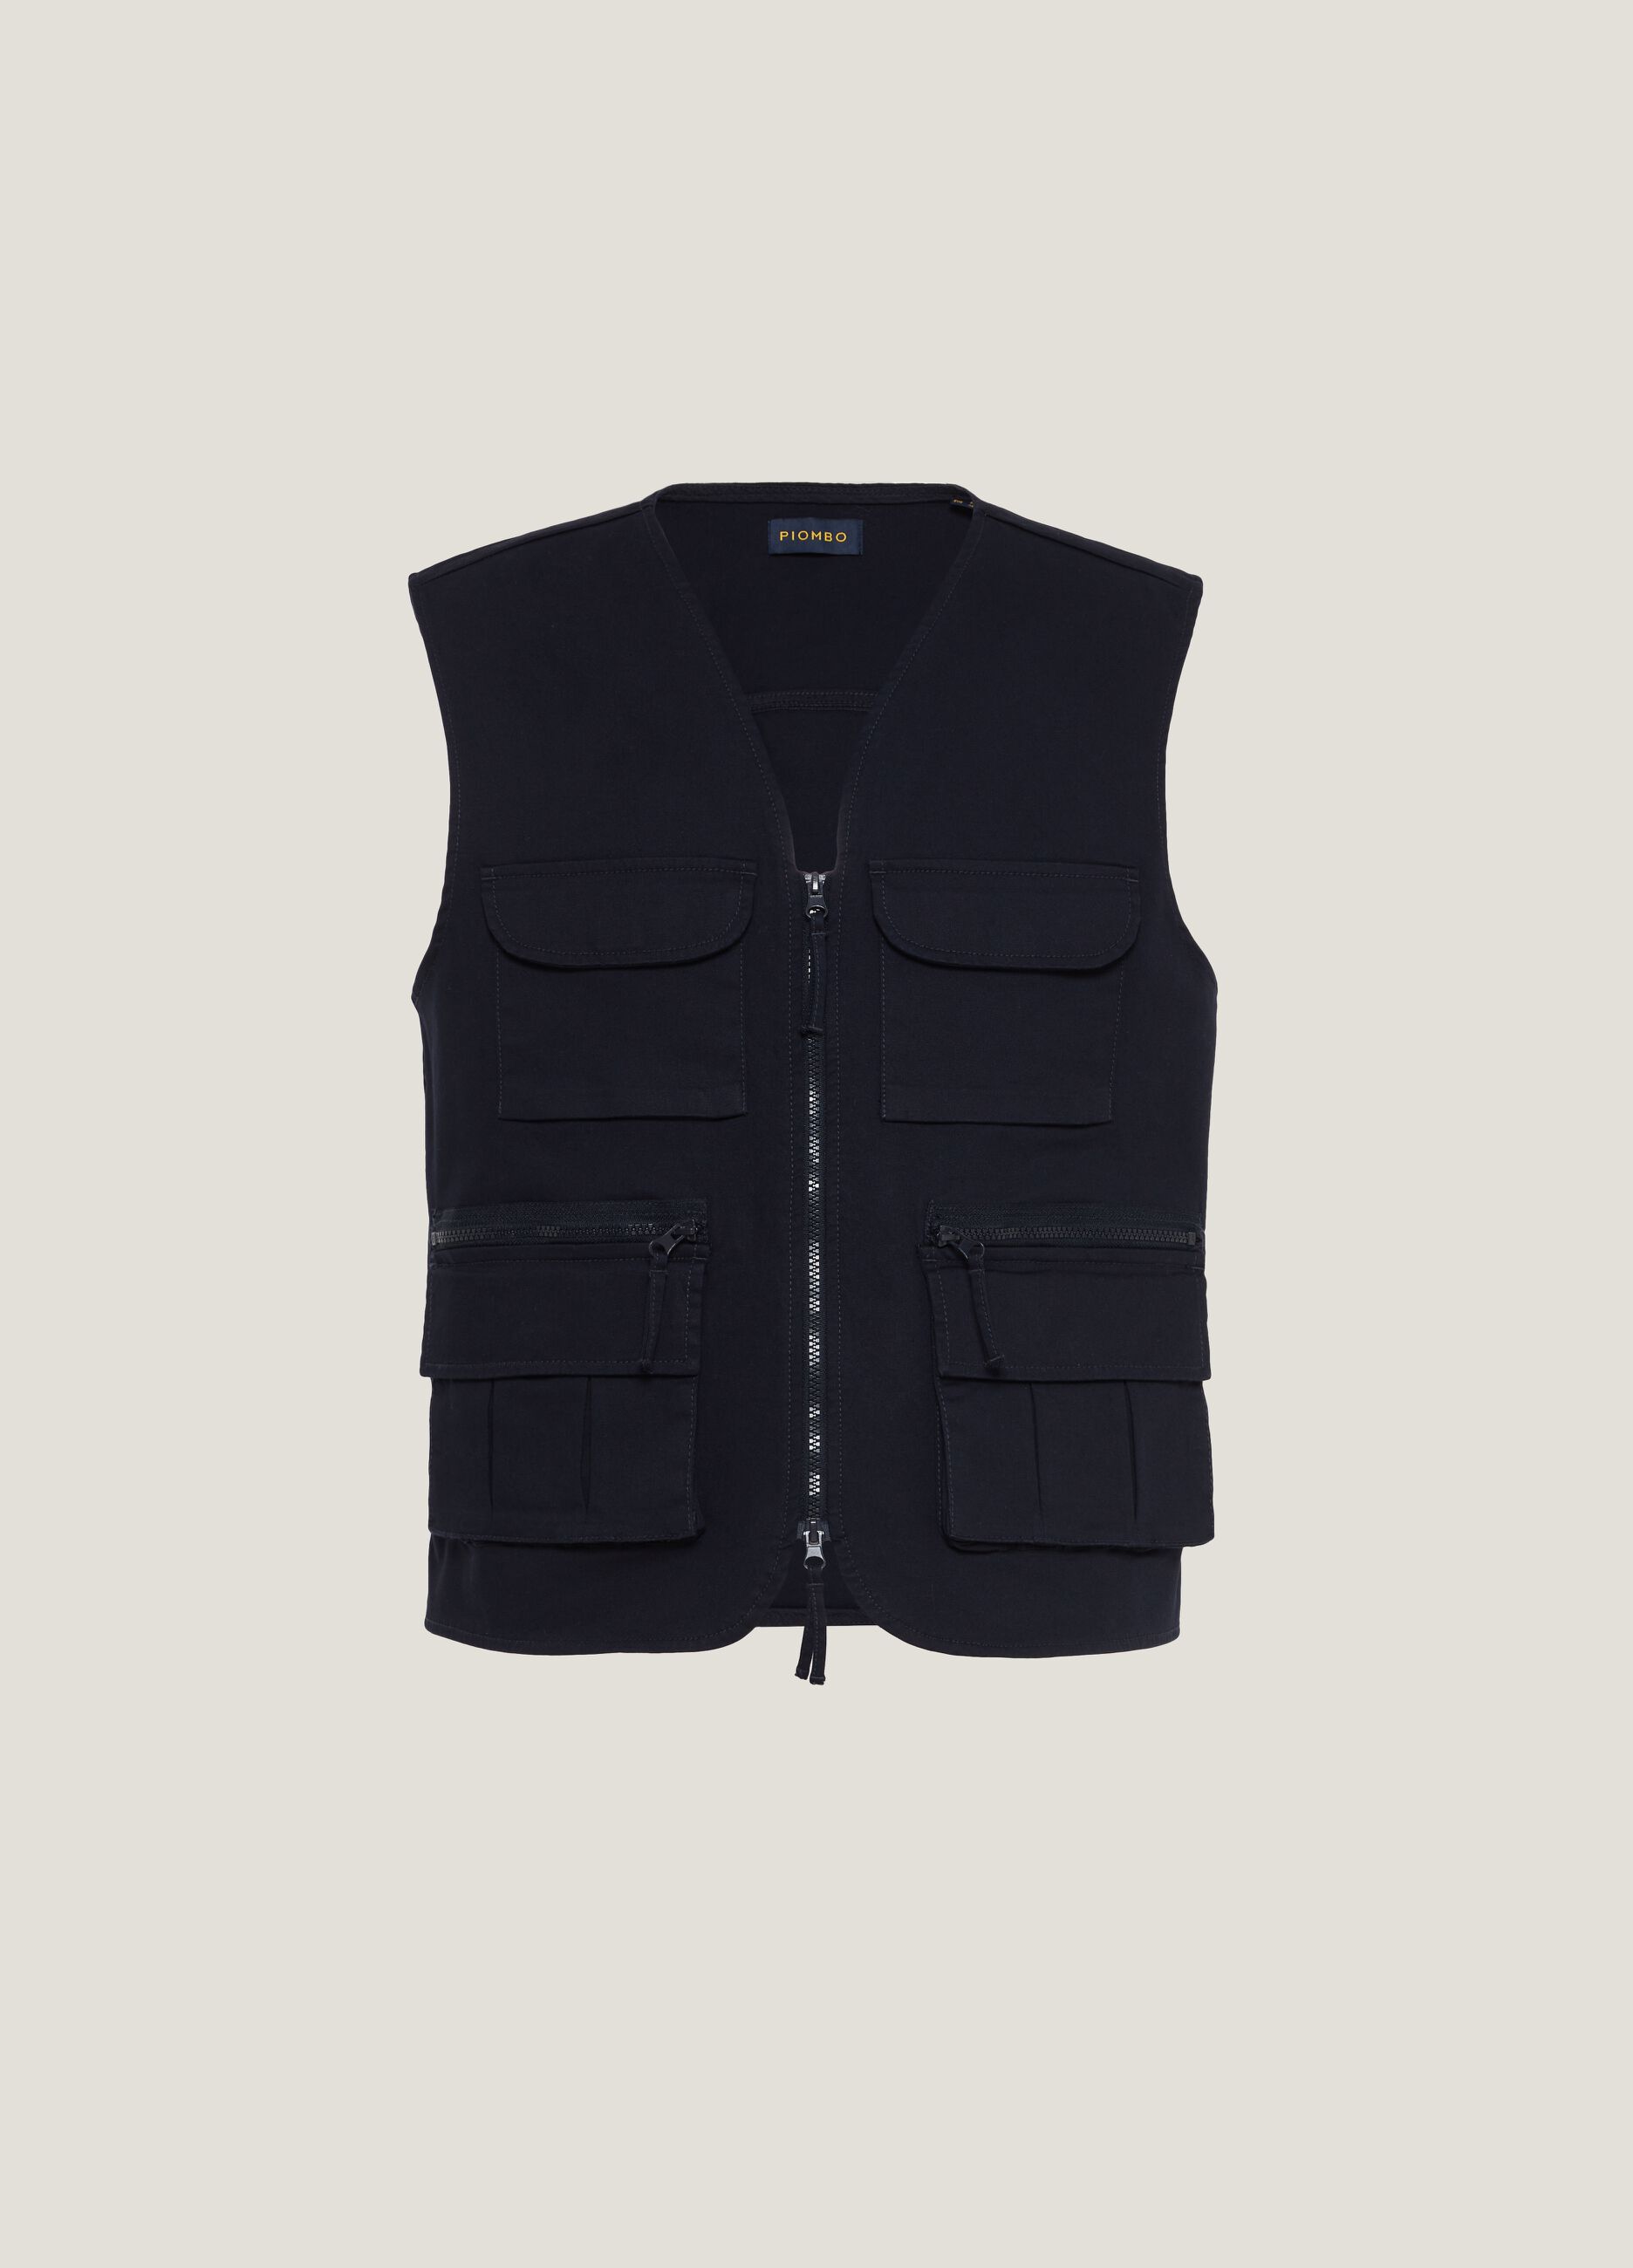 Full-zip gilet with pockets